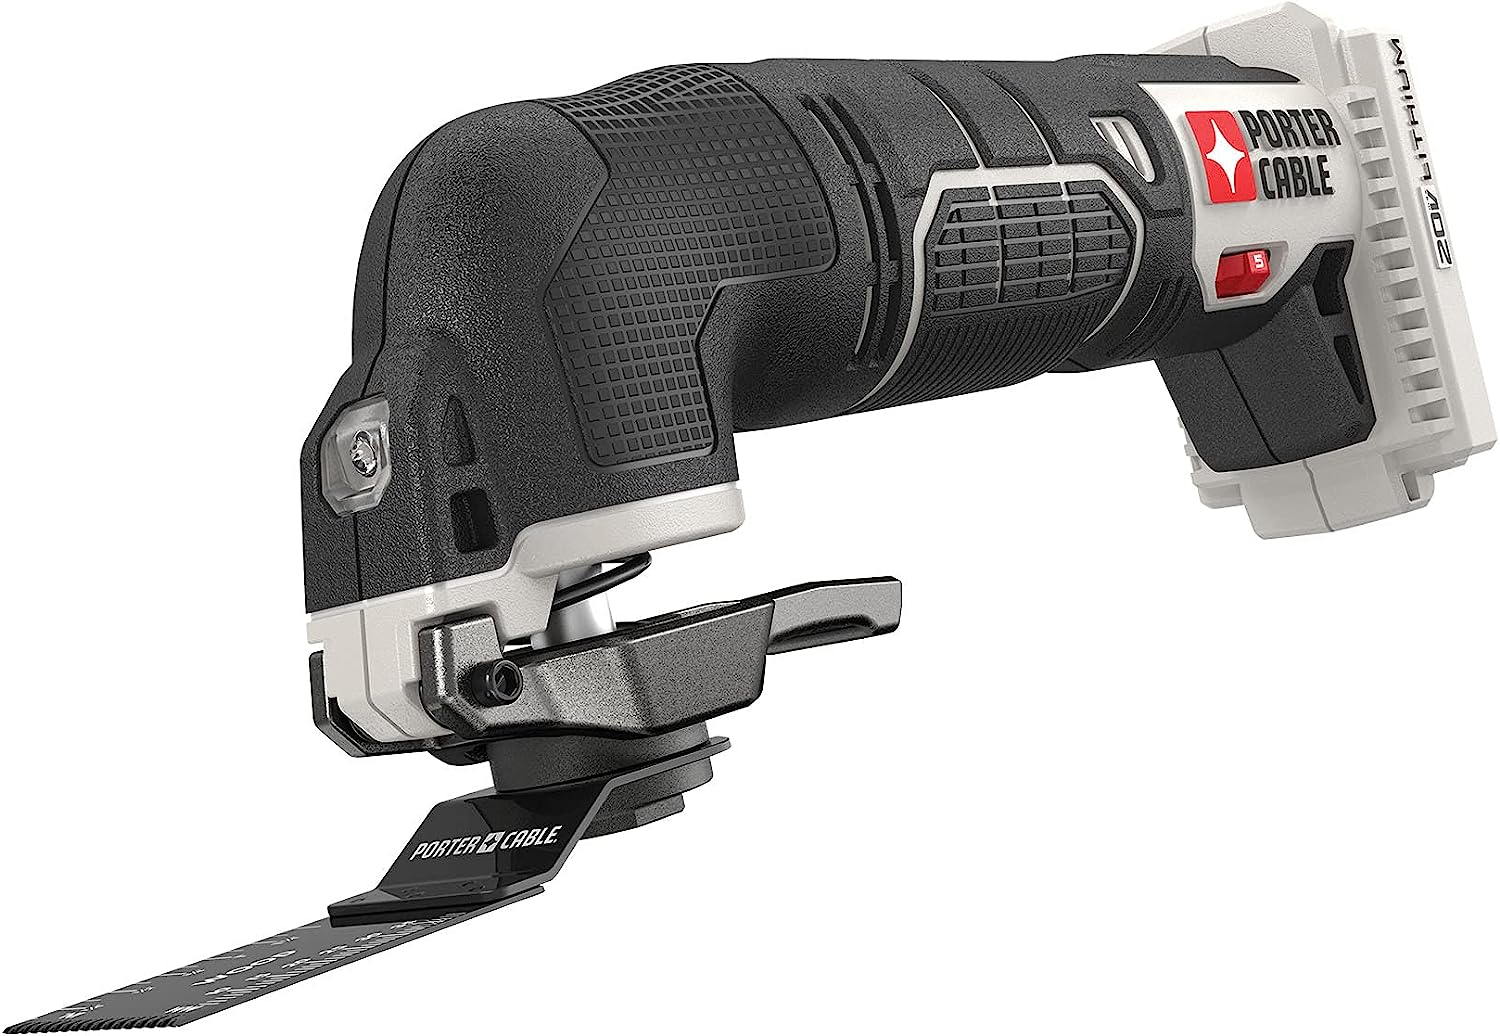 PORTER-CABLE 20V MAX* Oscillating Tool with 11-Piece [...]